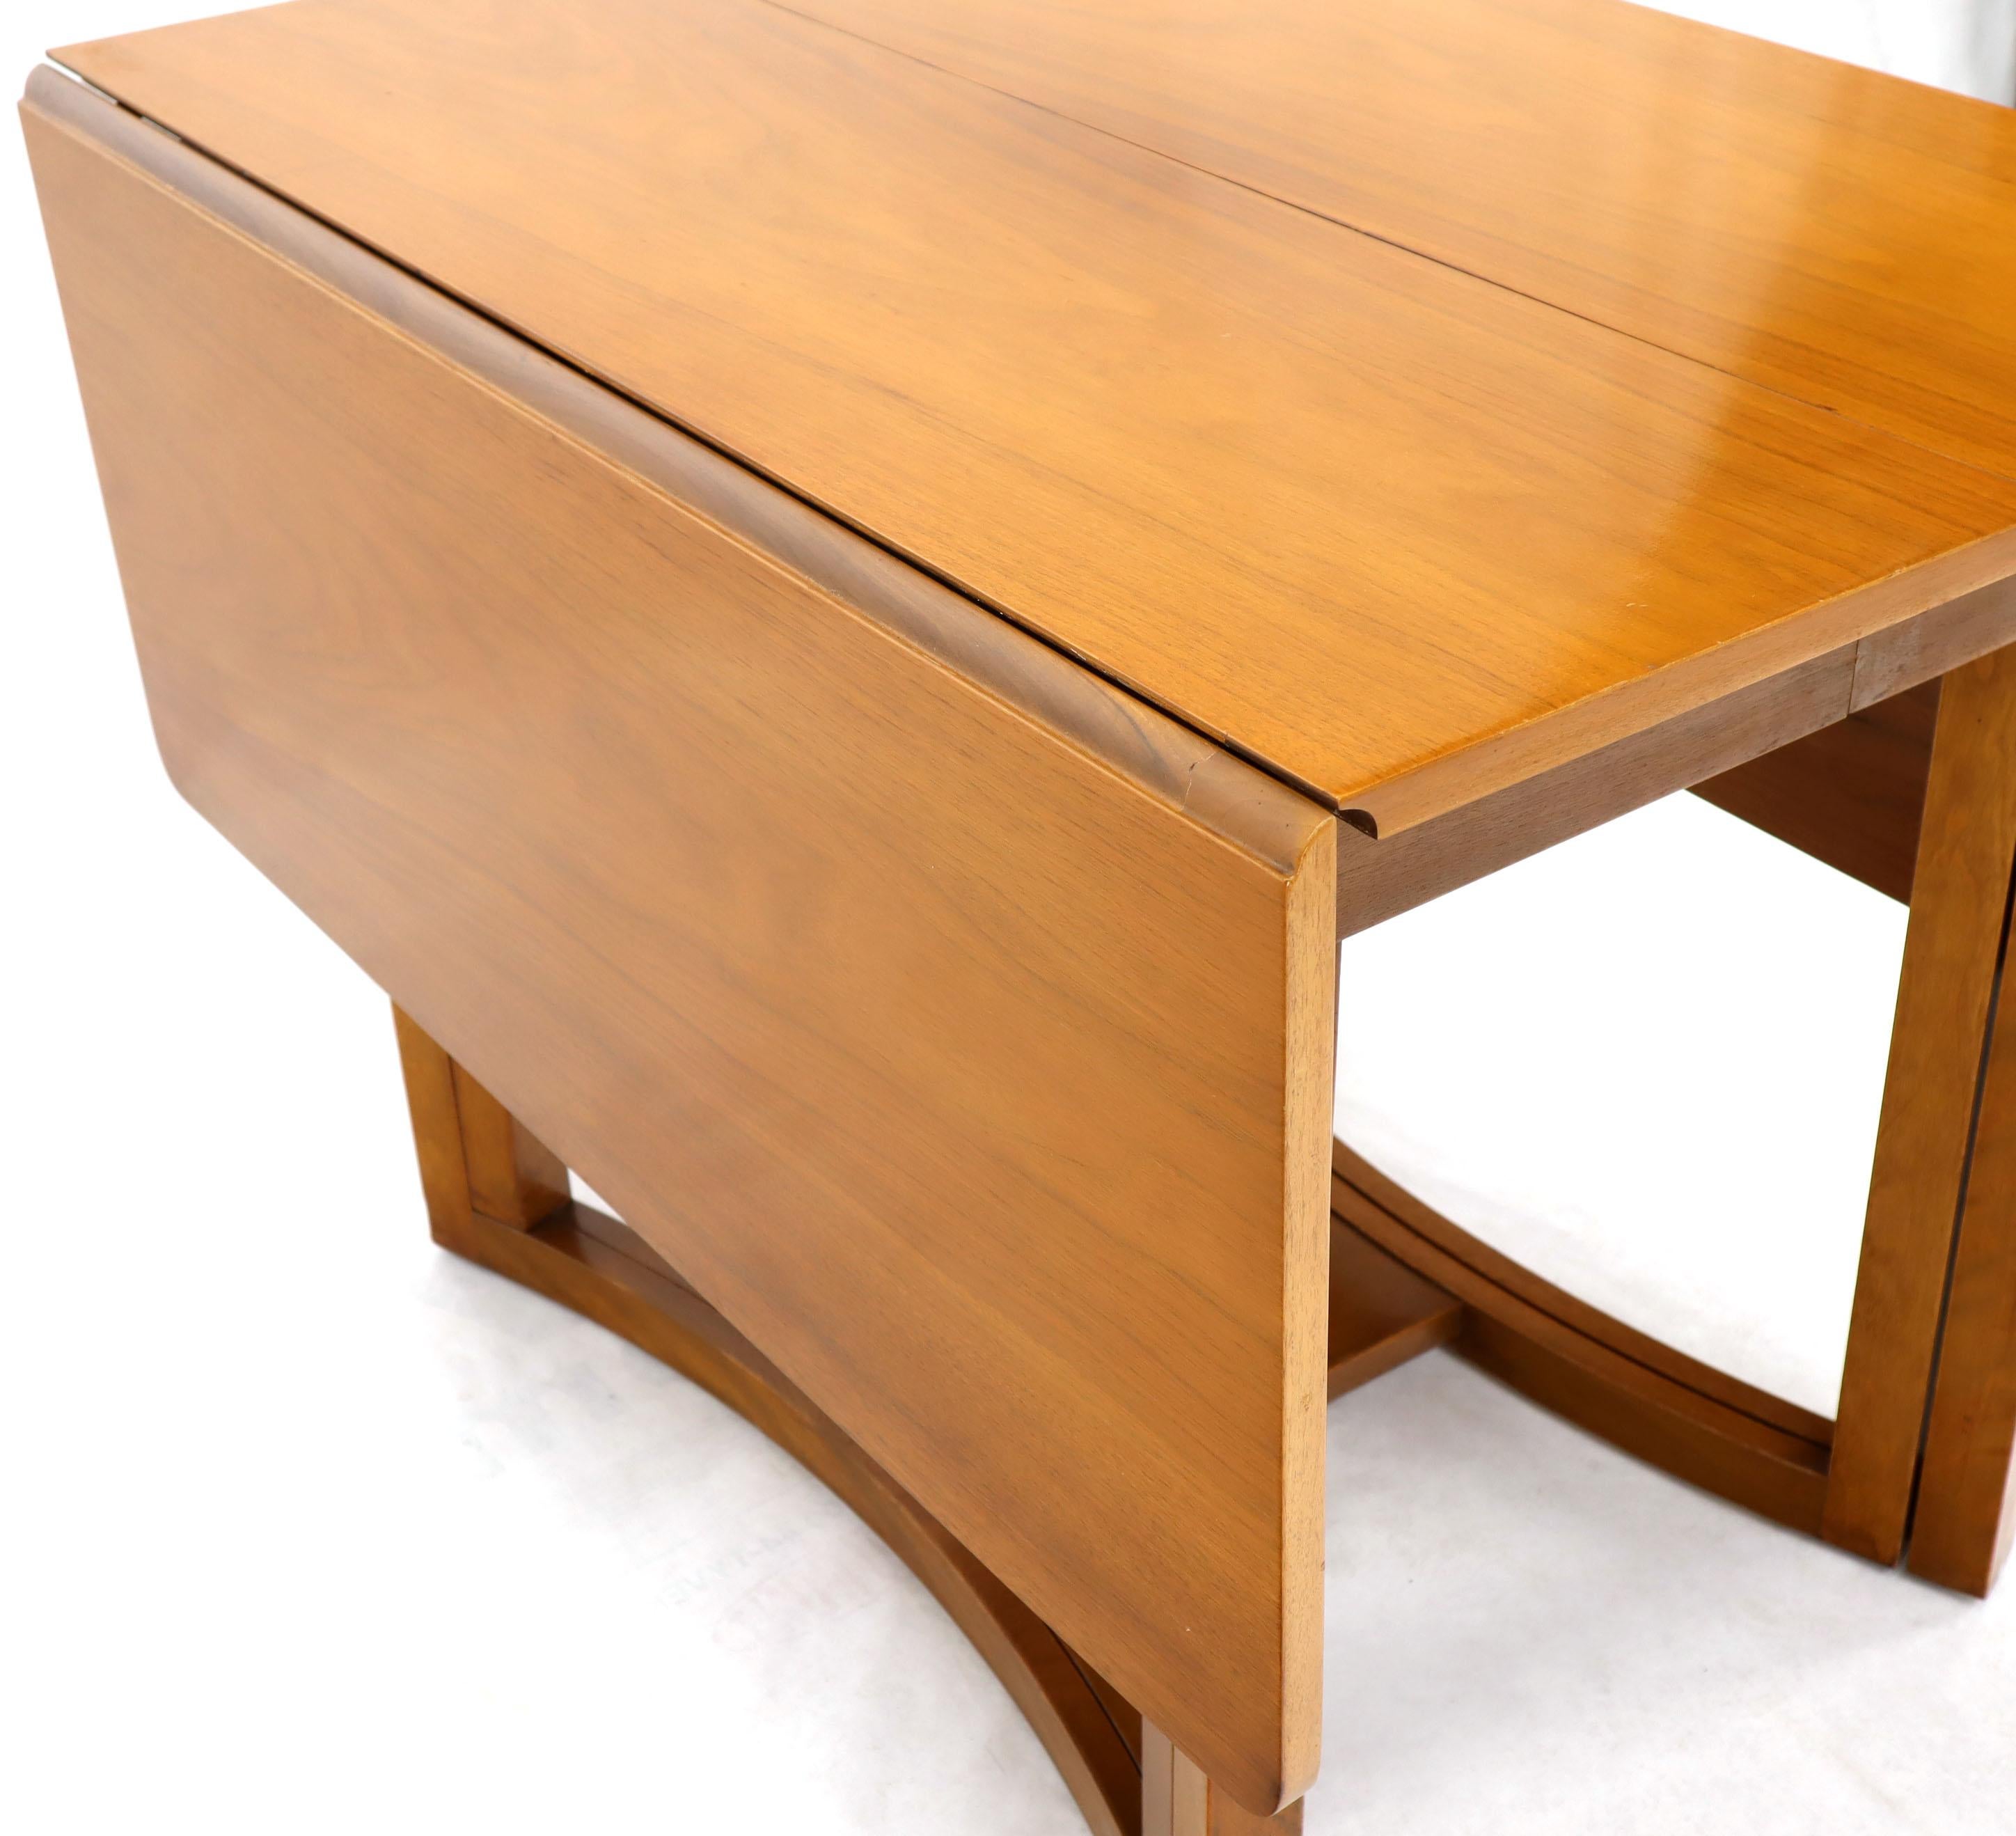 Midcentury Light Walnut Drop Leaf Expandable Dining Table, Three Leafs Boards im Angebot 3